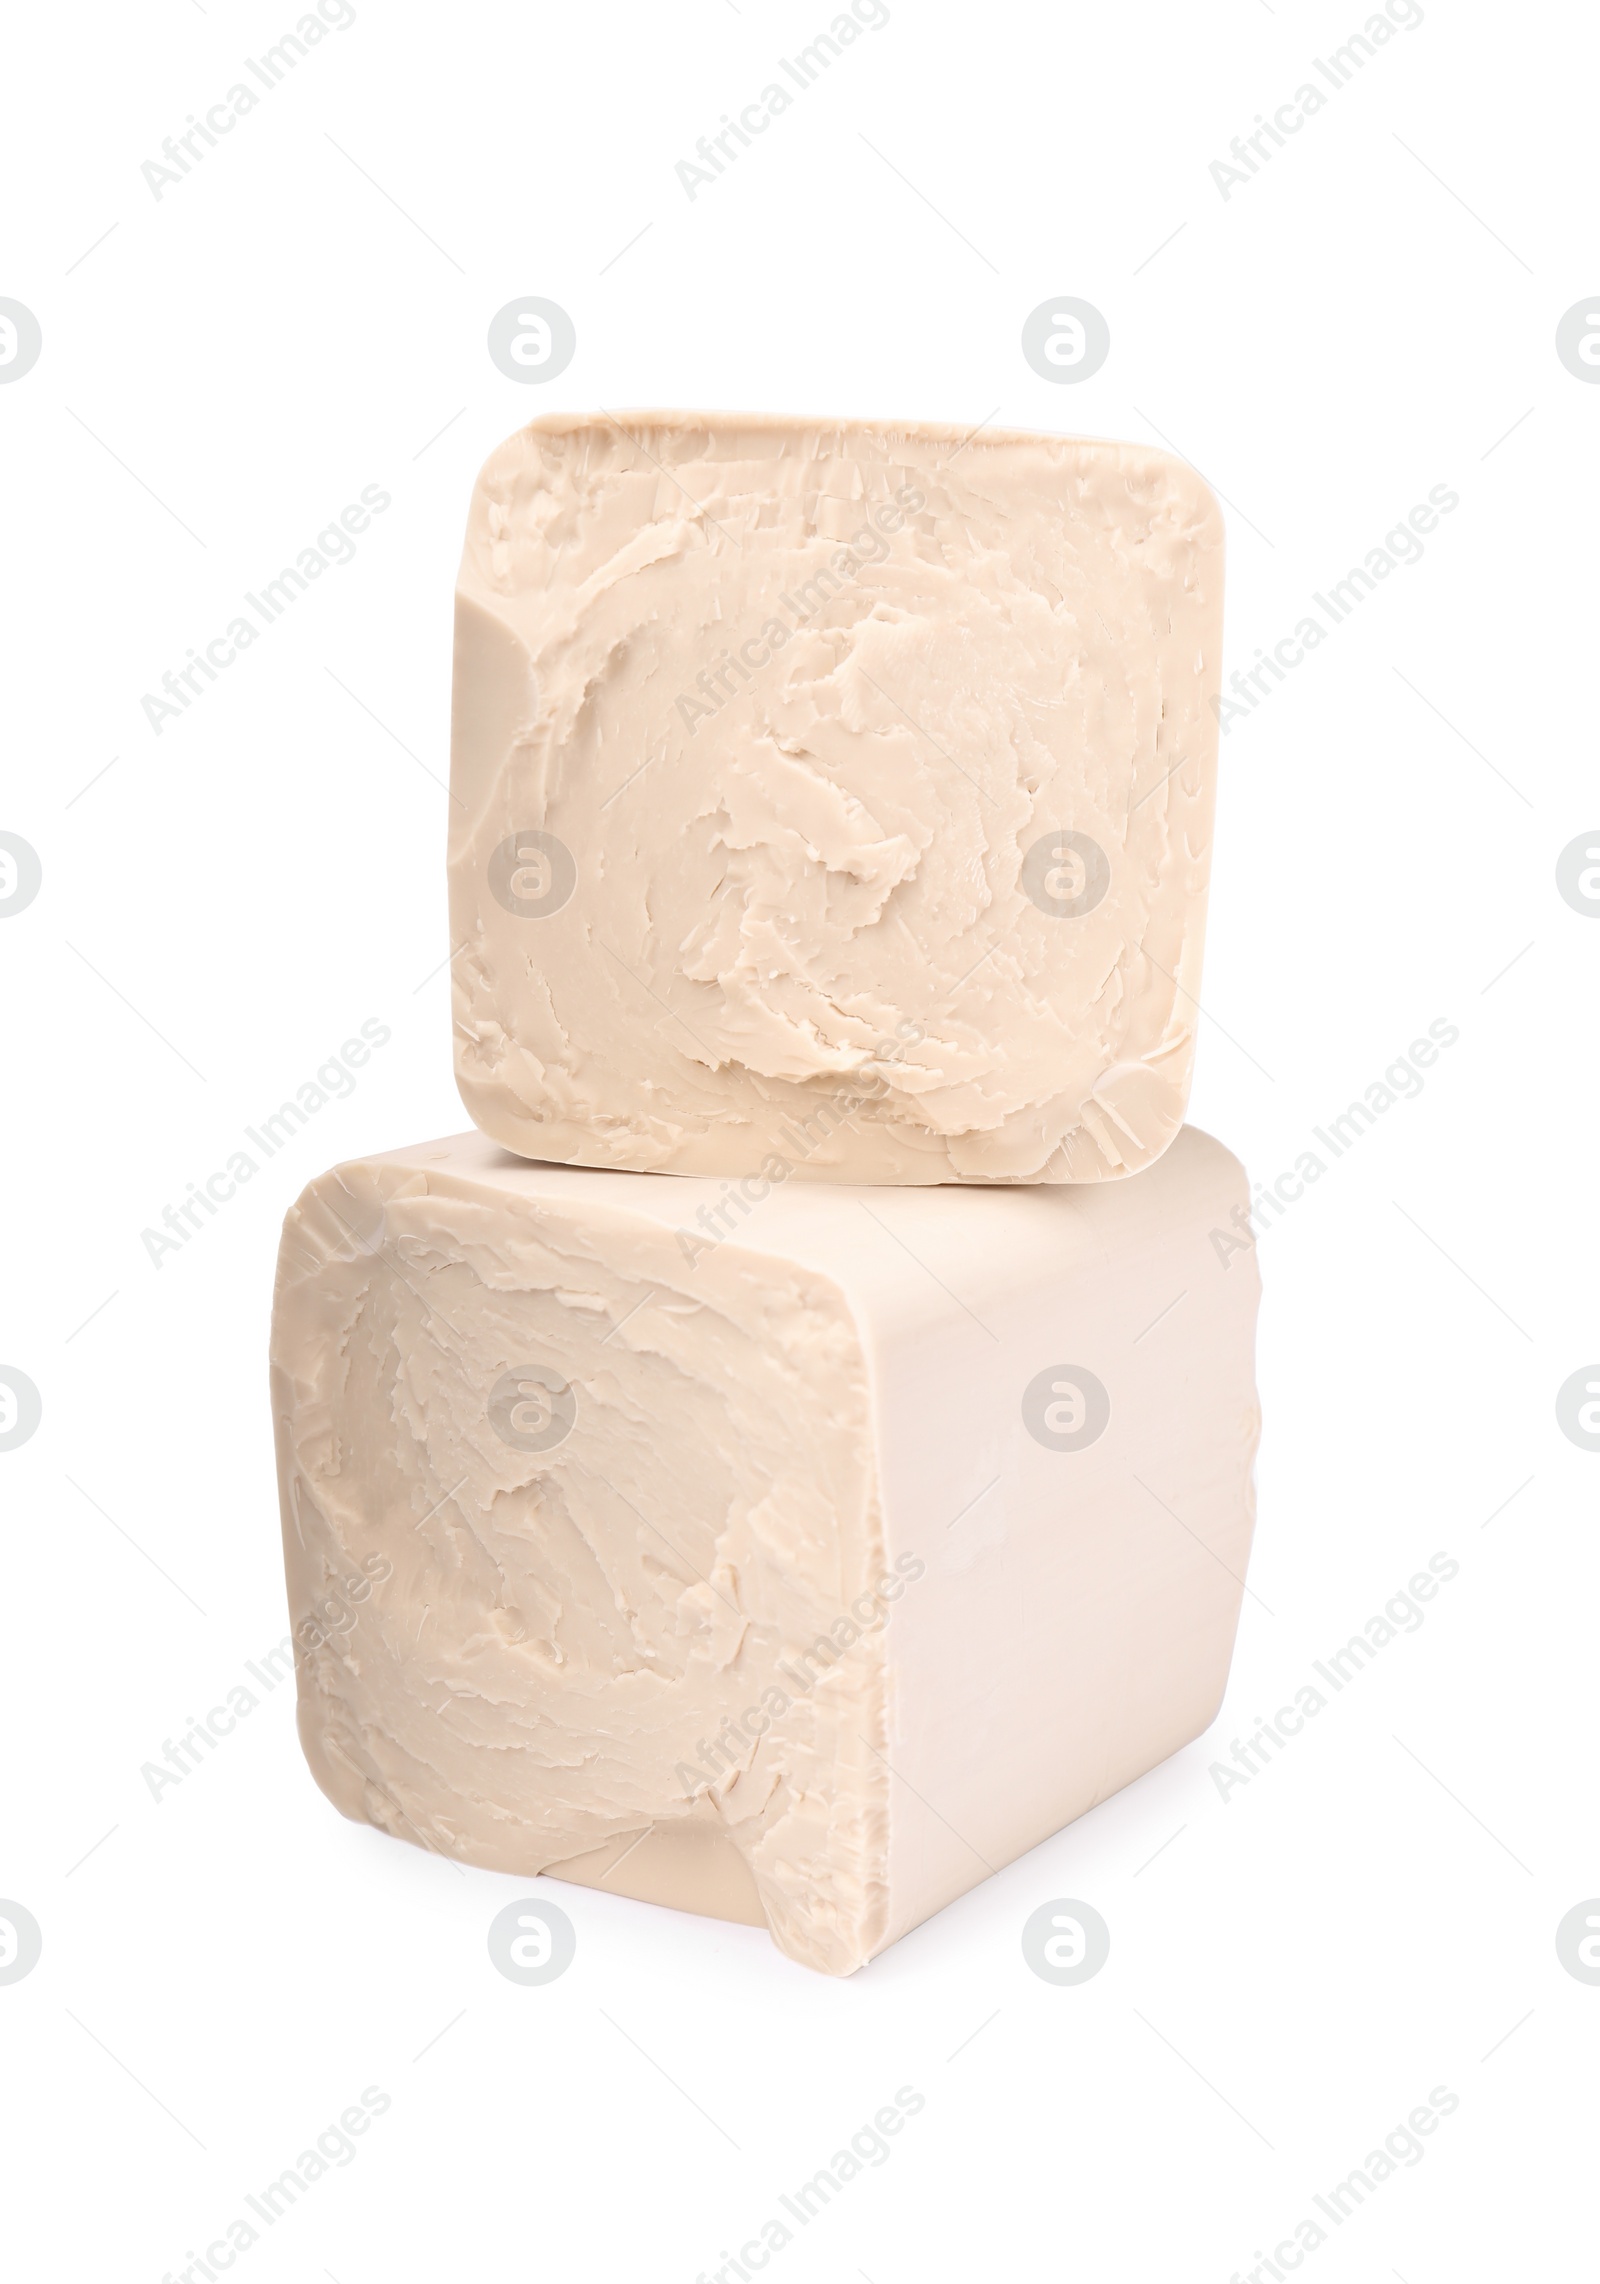 Photo of Blocks of compressed yeast isolated on white